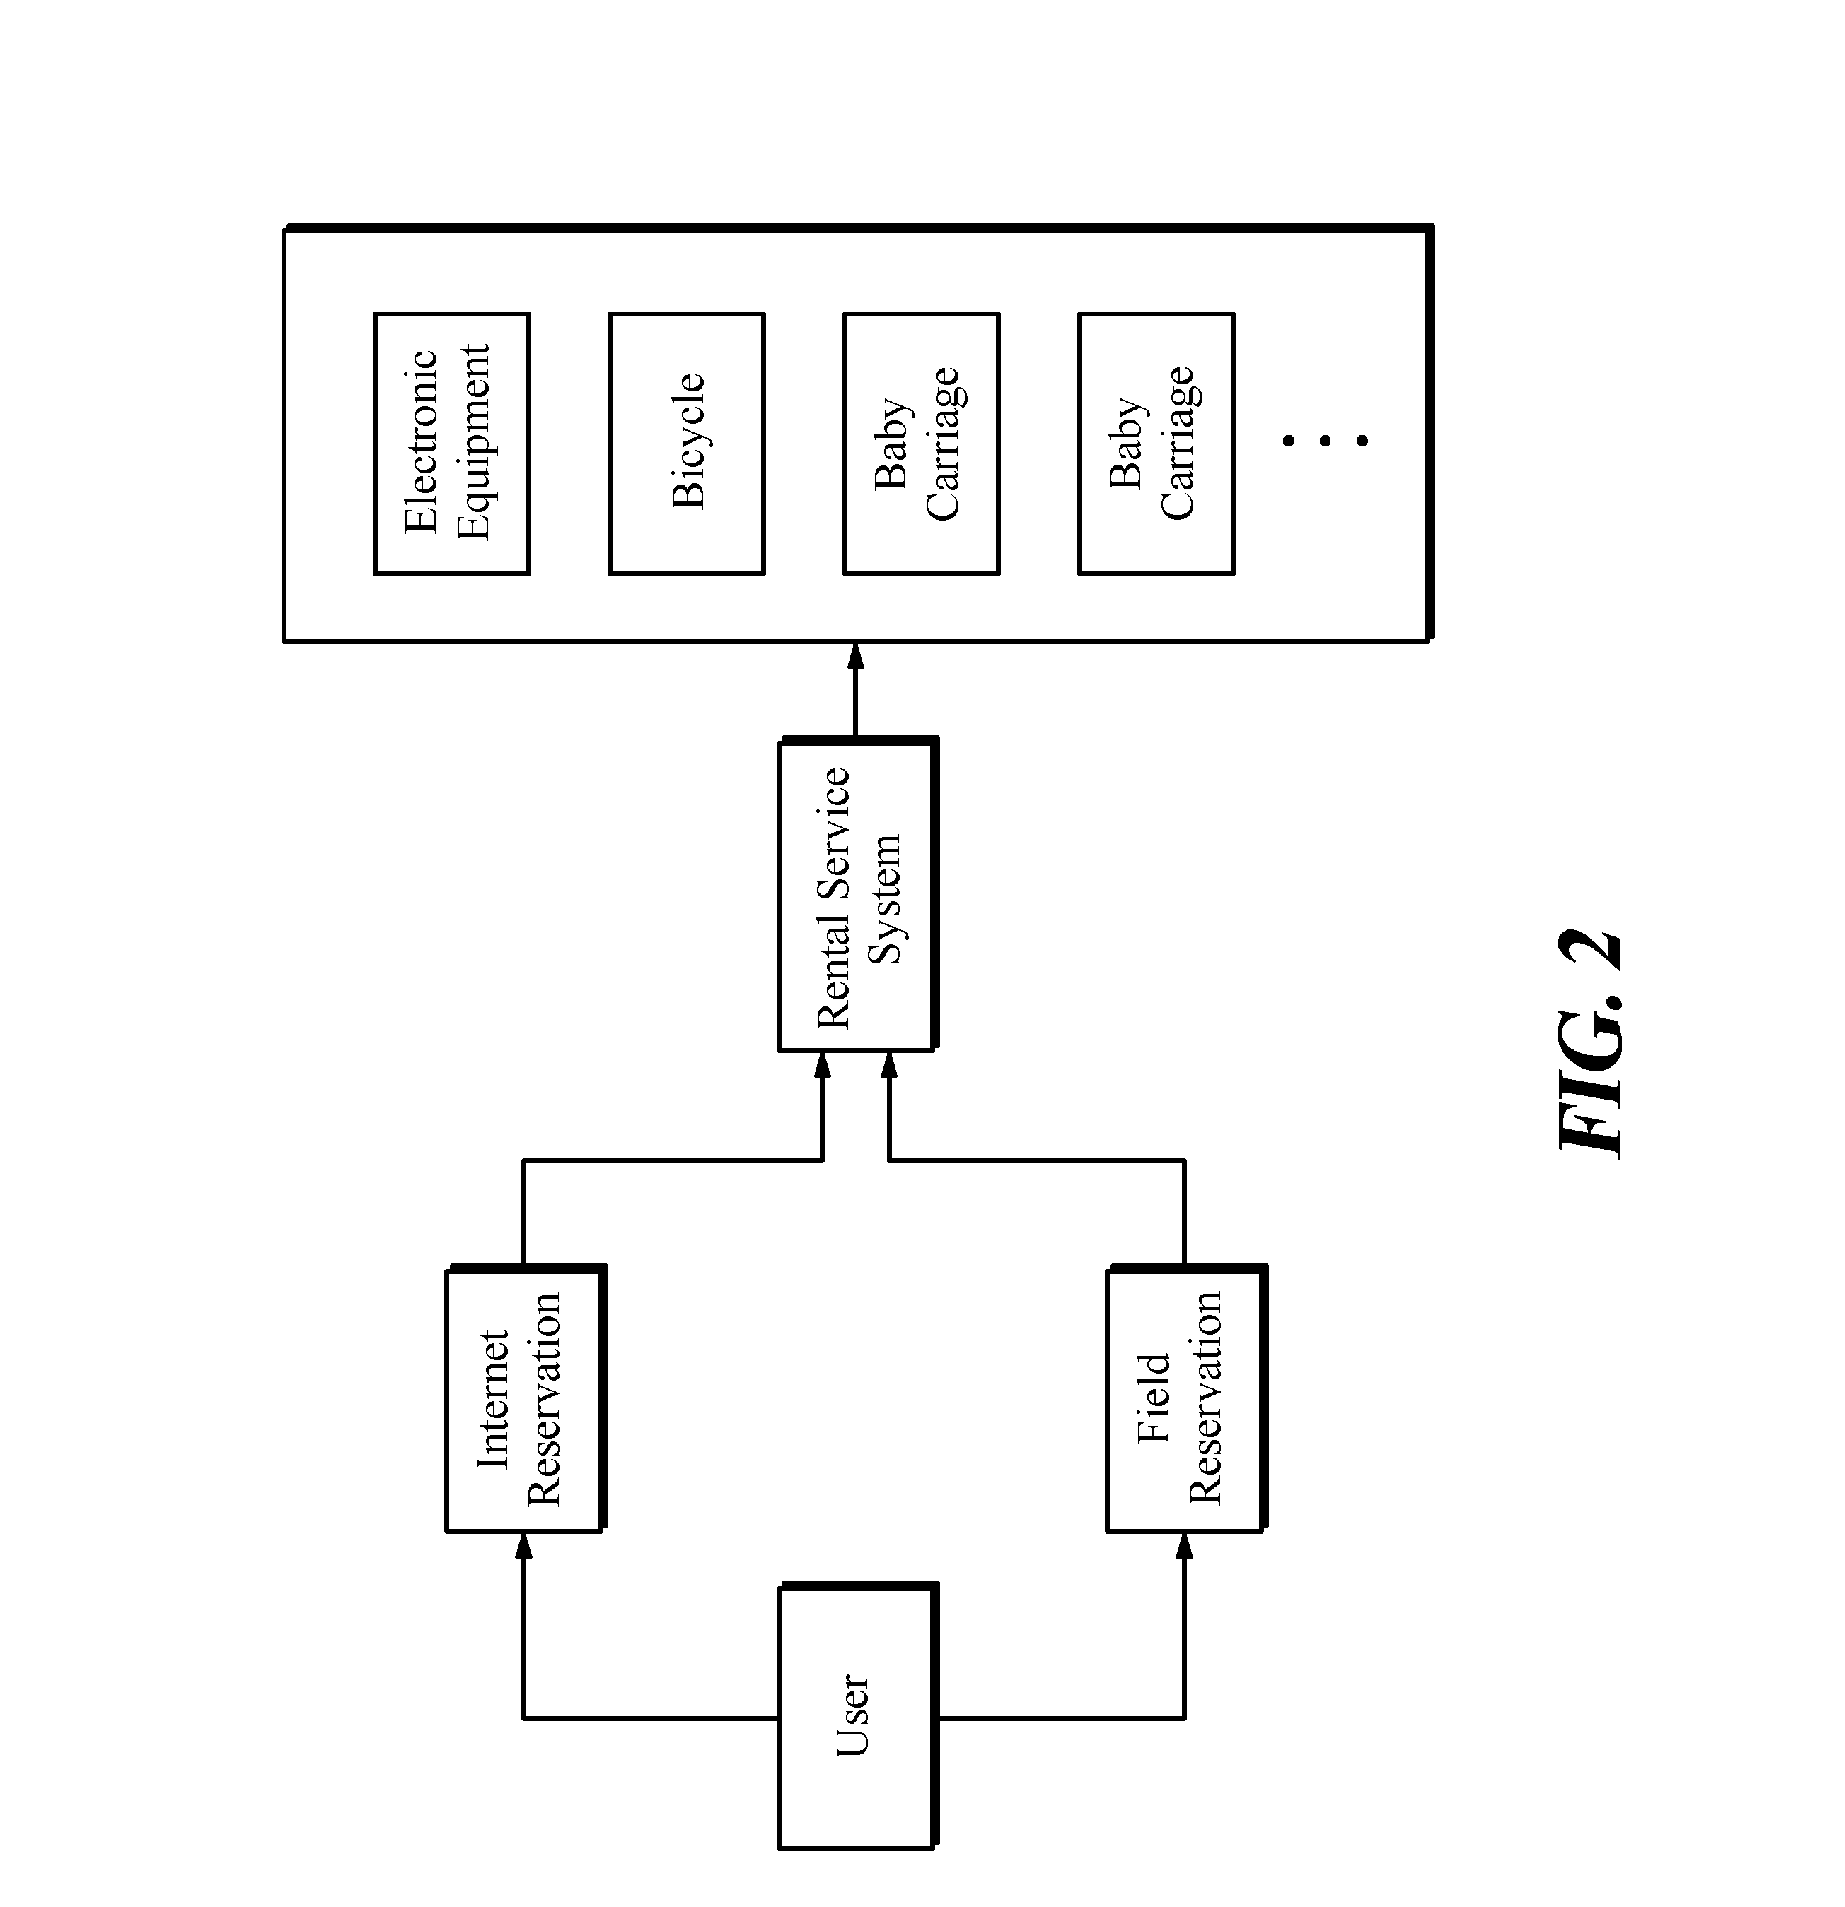 Method and system for providing a public article rental service using a biometric identity card